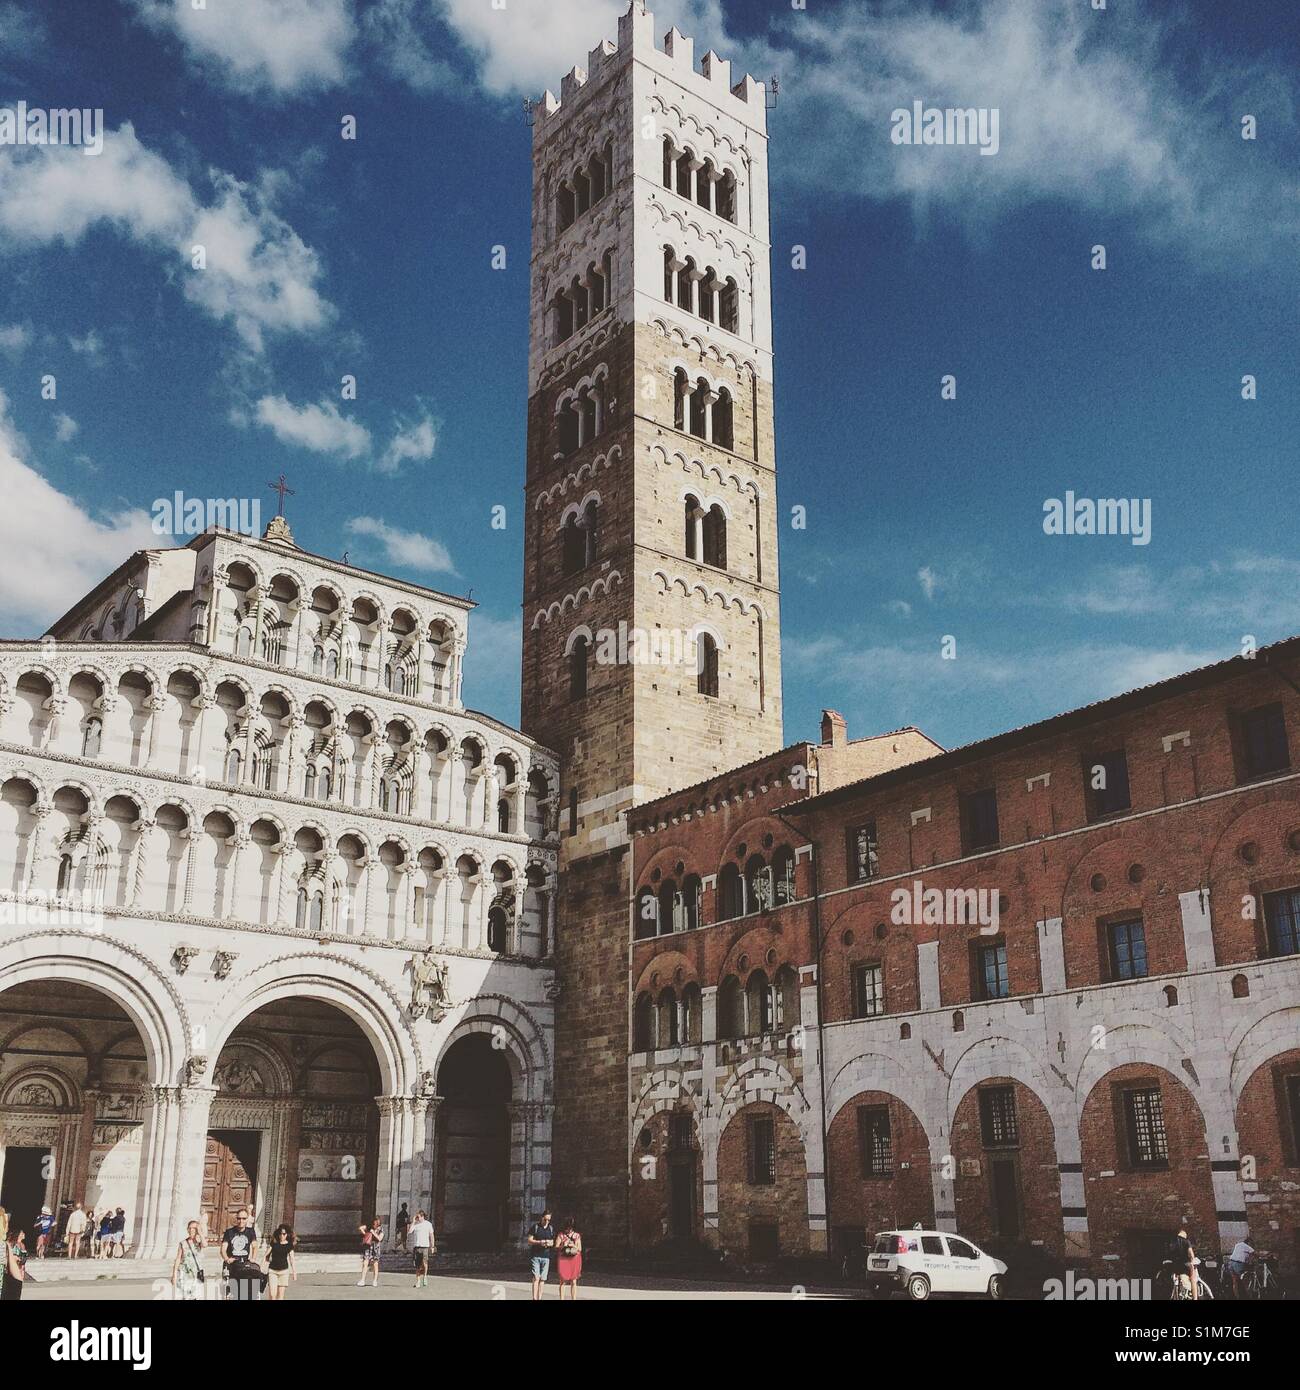 Kathedrale San Martino in Lucca, Italien Stockfoto